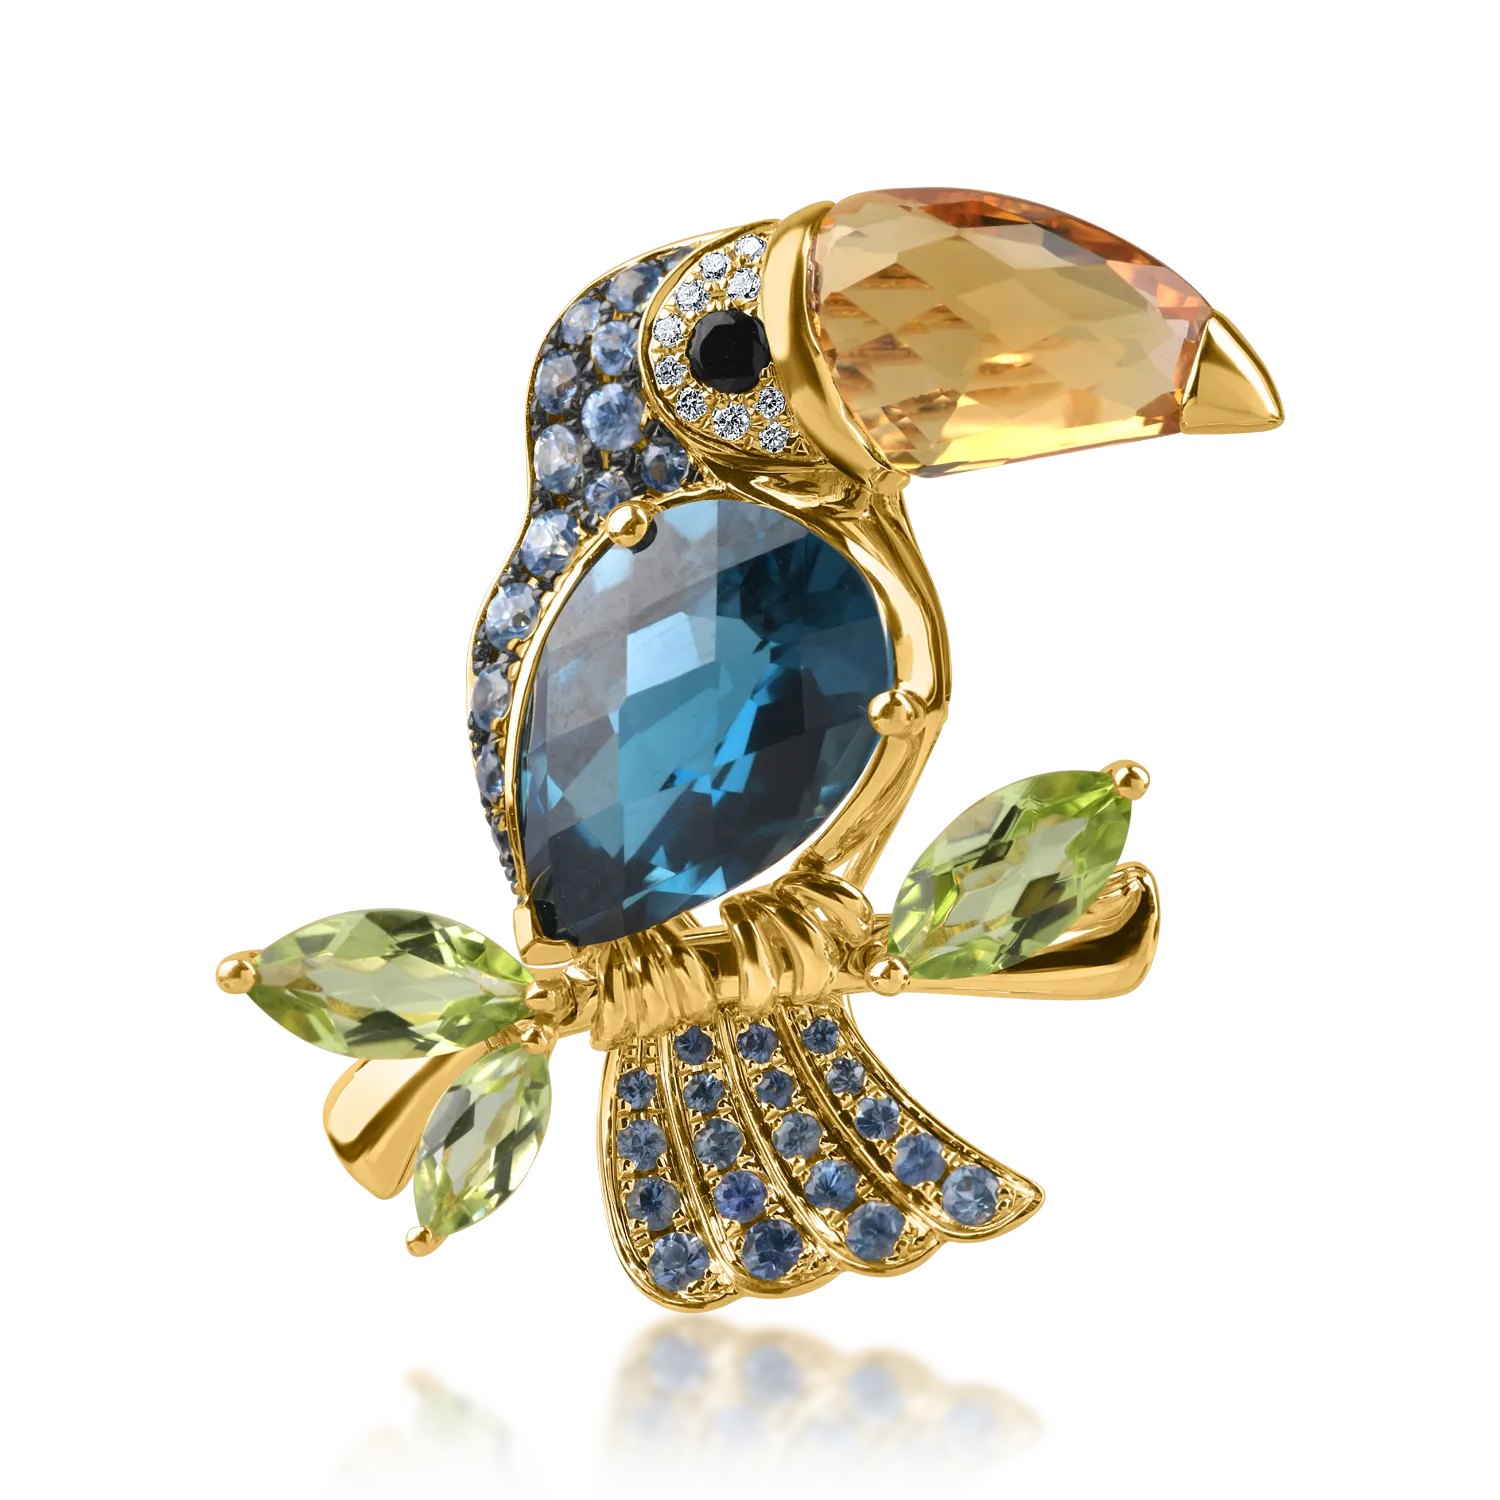 Yellow gold toucan brooch with 10ct semi-precious stones